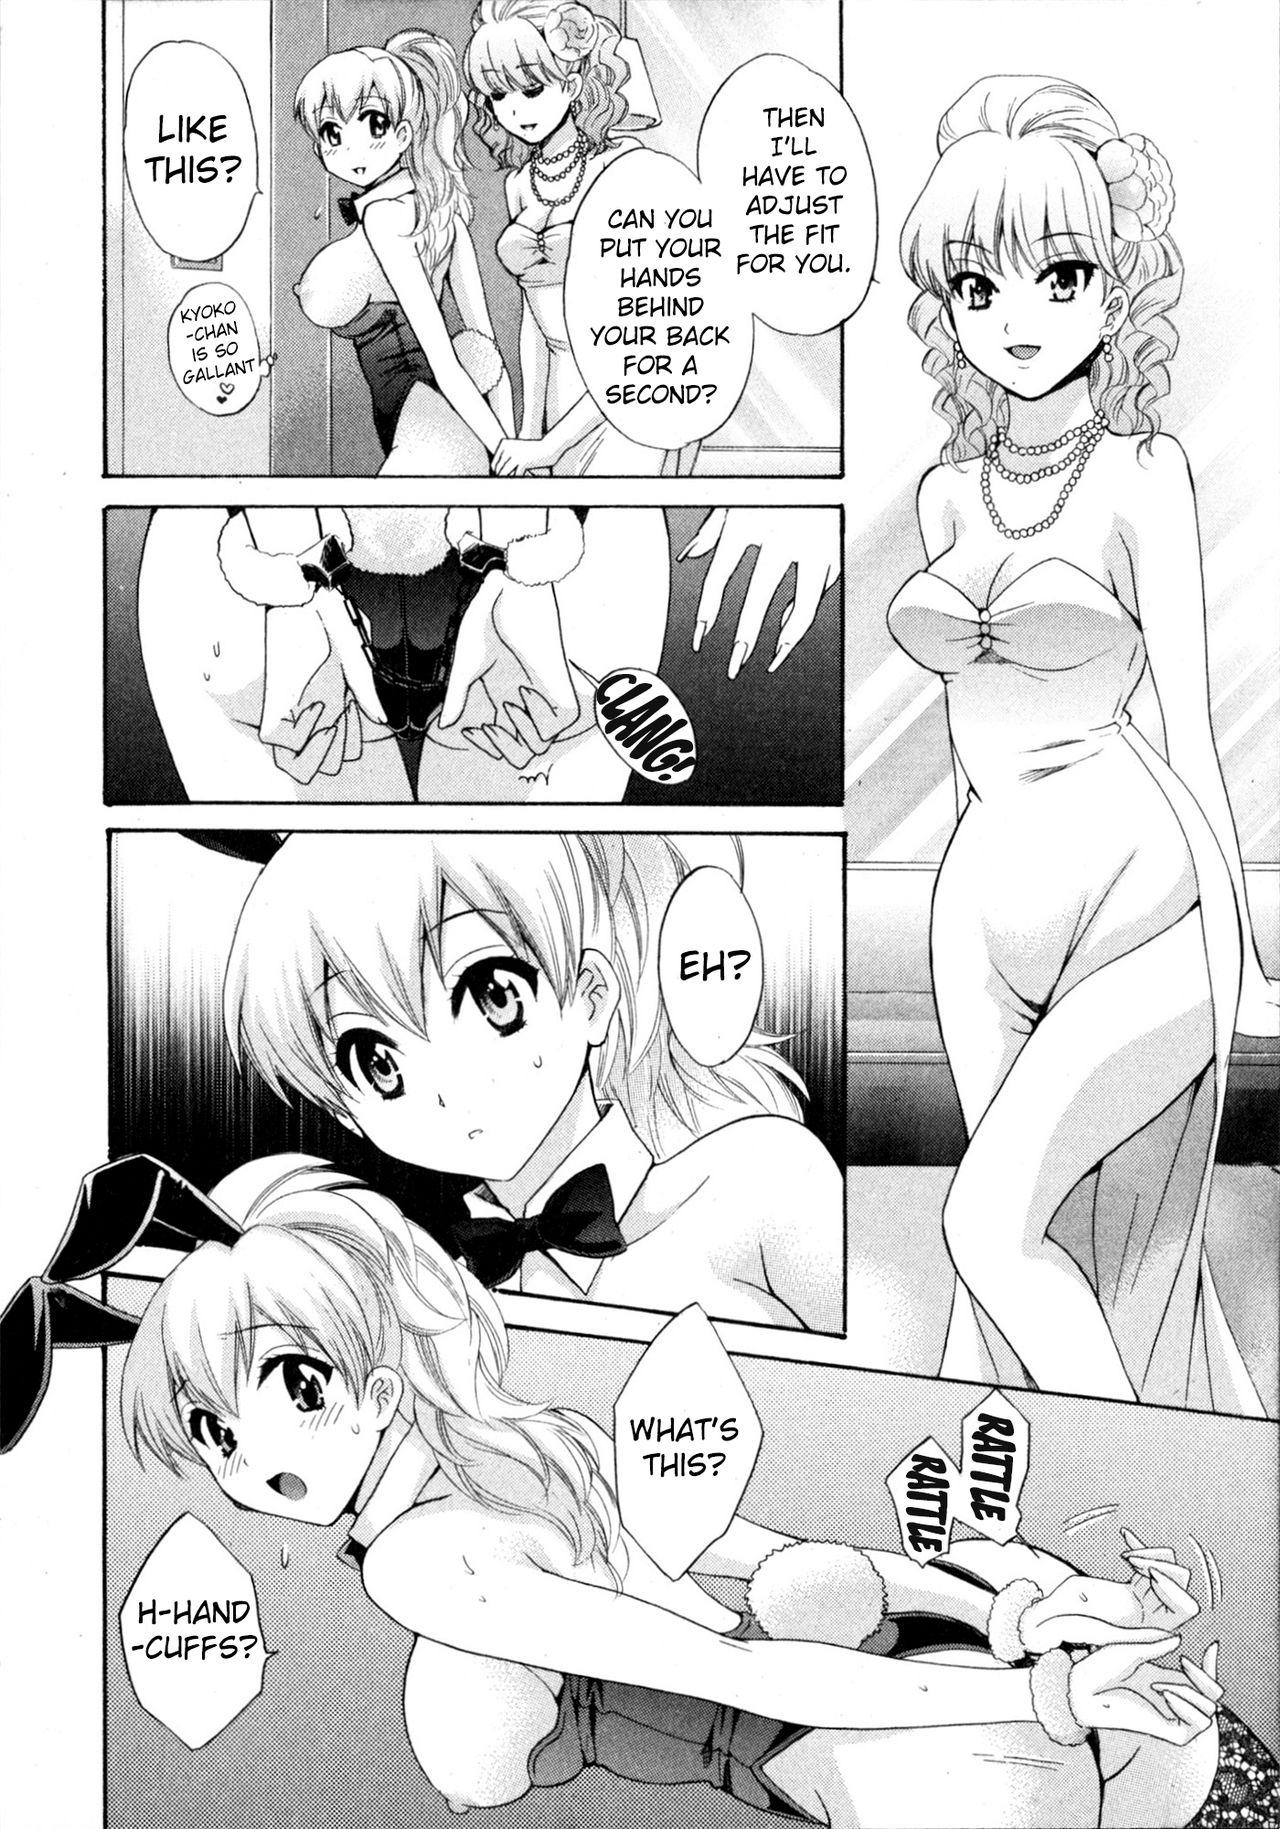 Hot Wife Tenshi no Marshmallow 4 Ch. 25-27 Jerk Off - Page 10